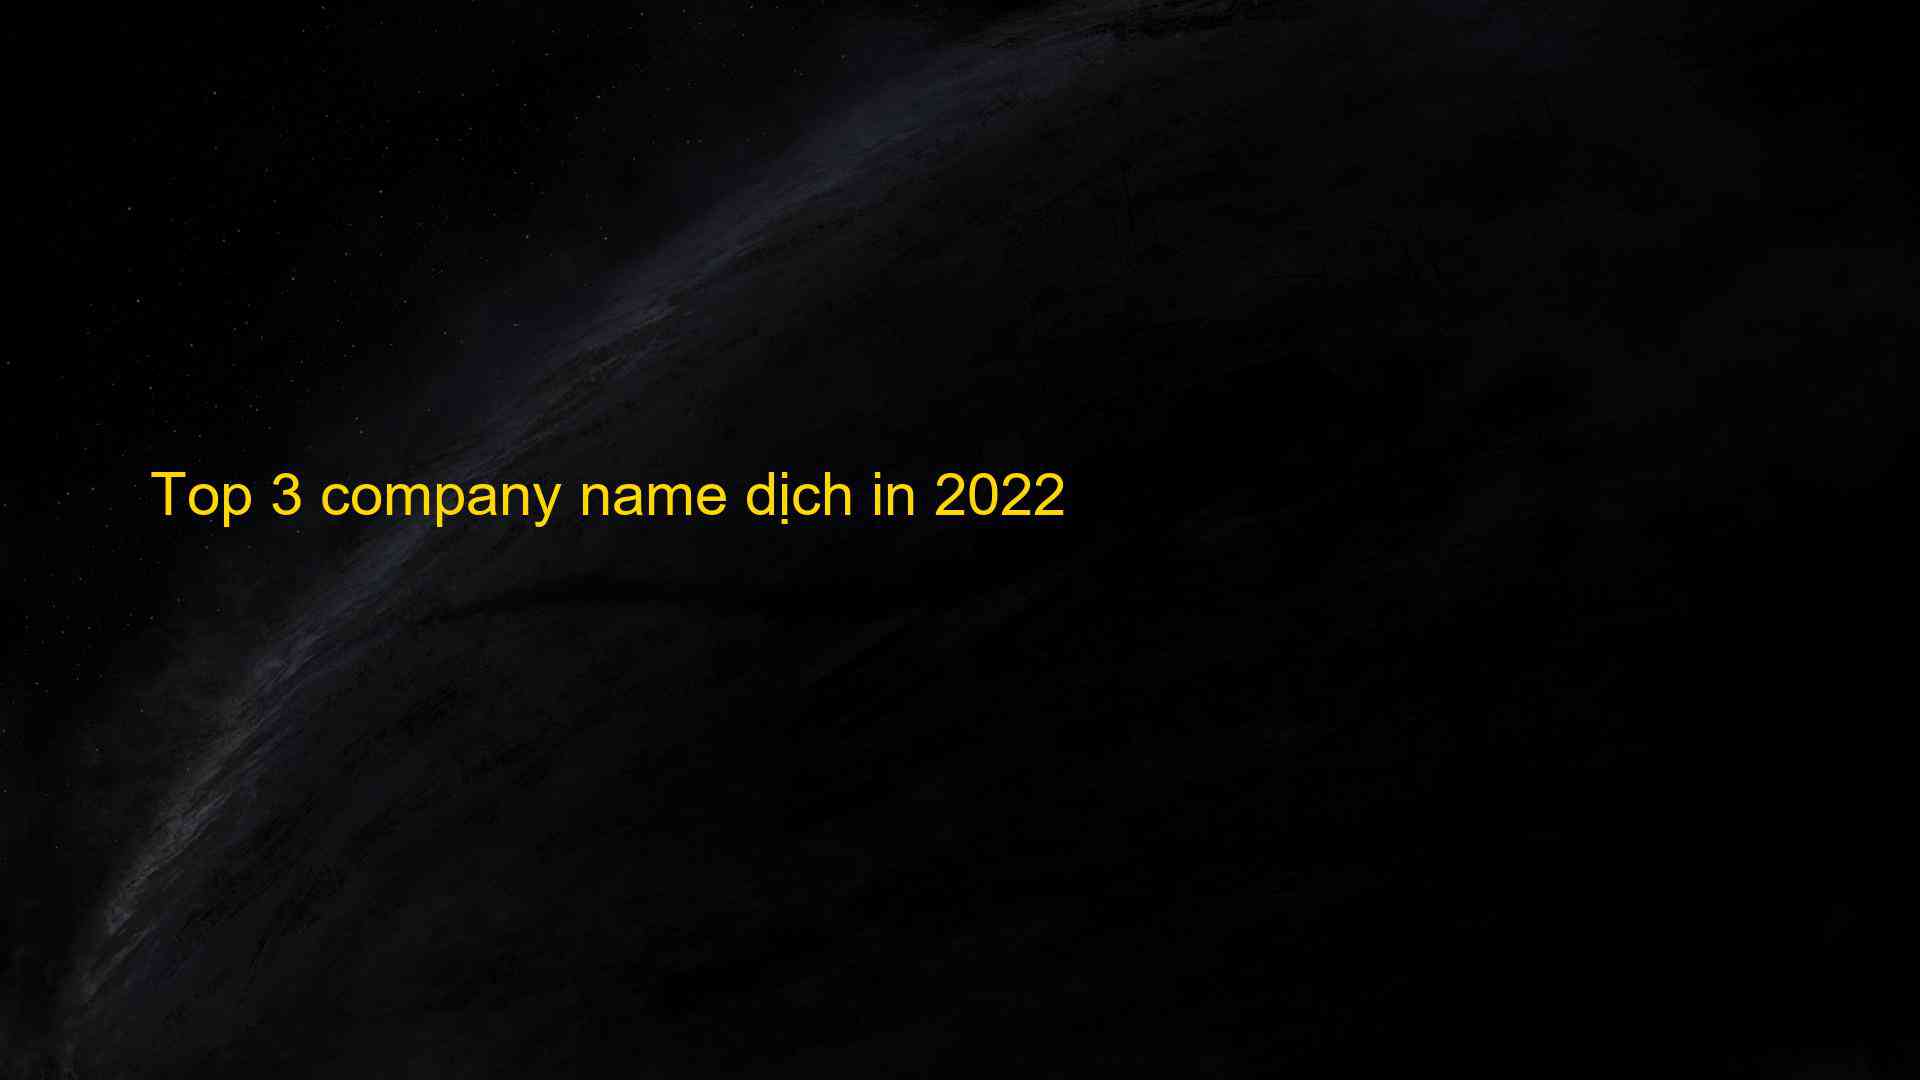 Top 3 company name dich in 2022 1660062844